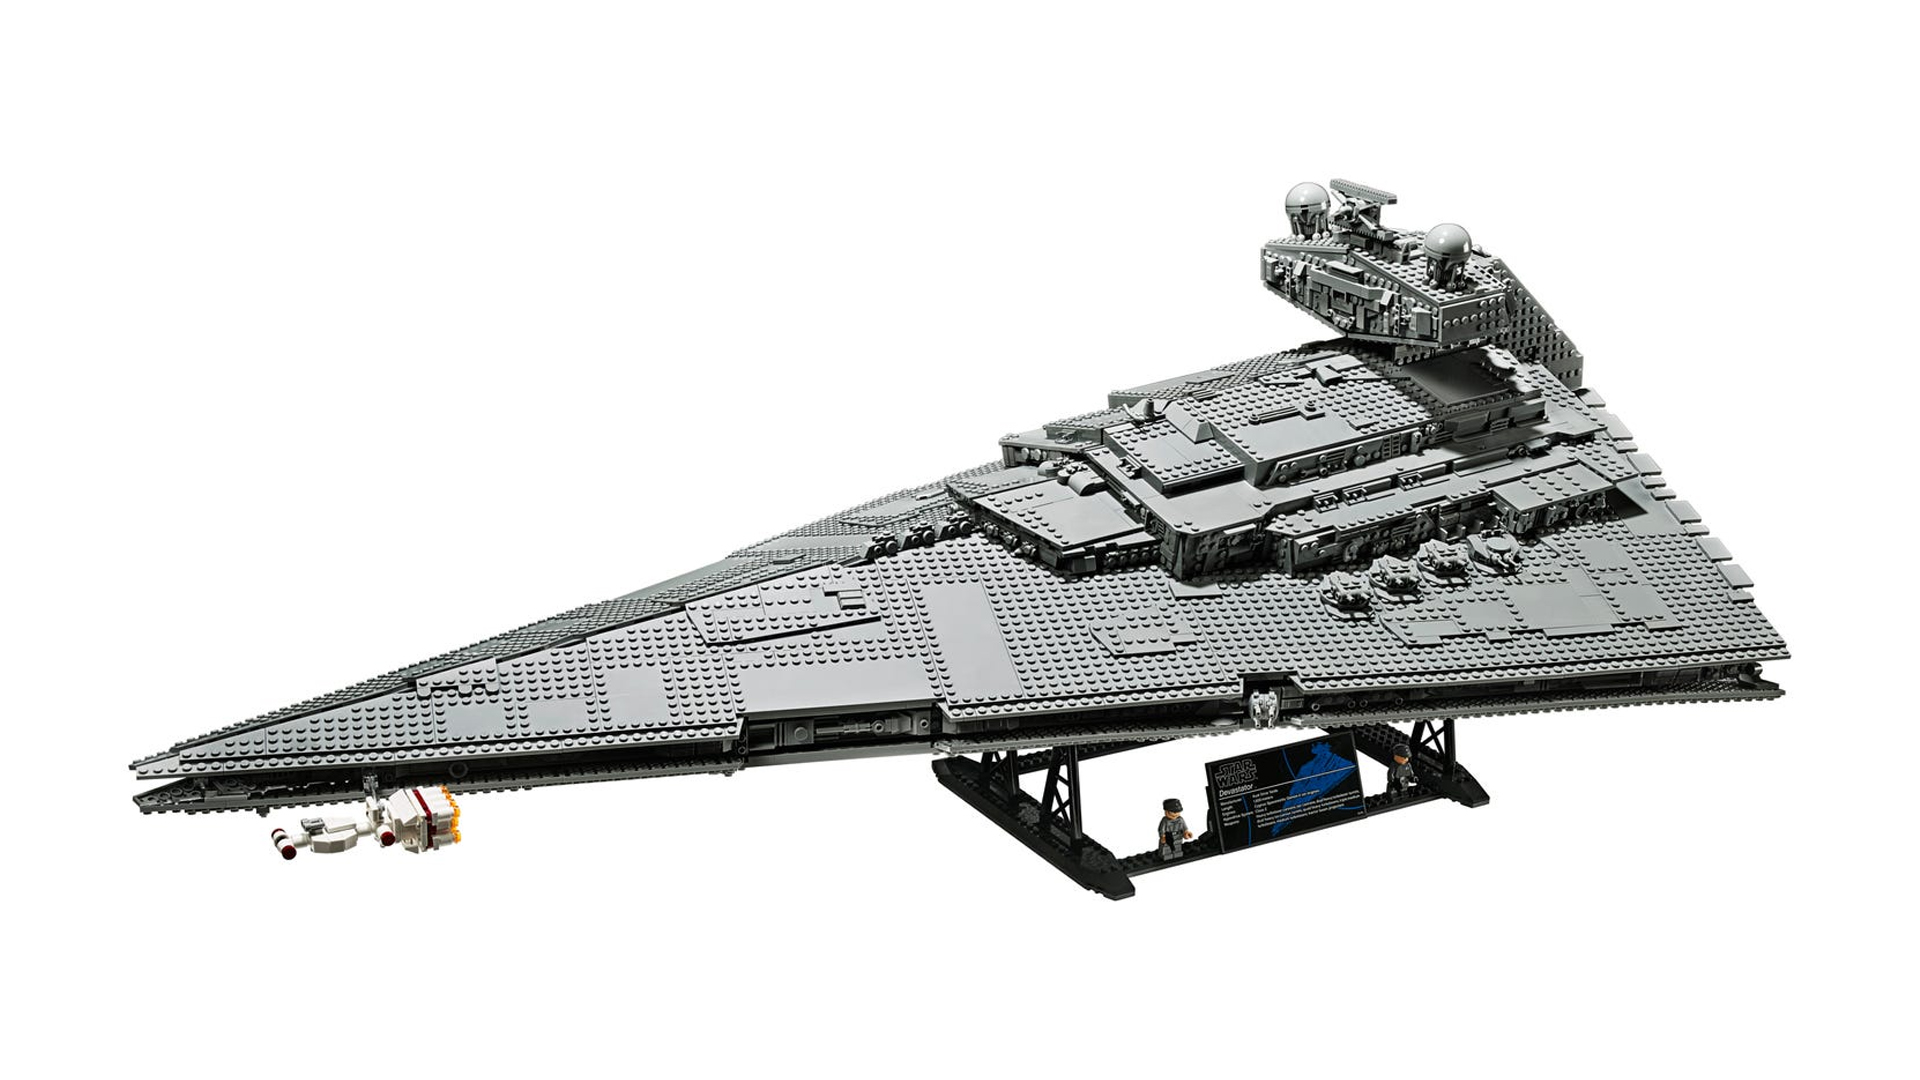 Lego Star Wars Imperial Star Destroyer_The LEGO Group